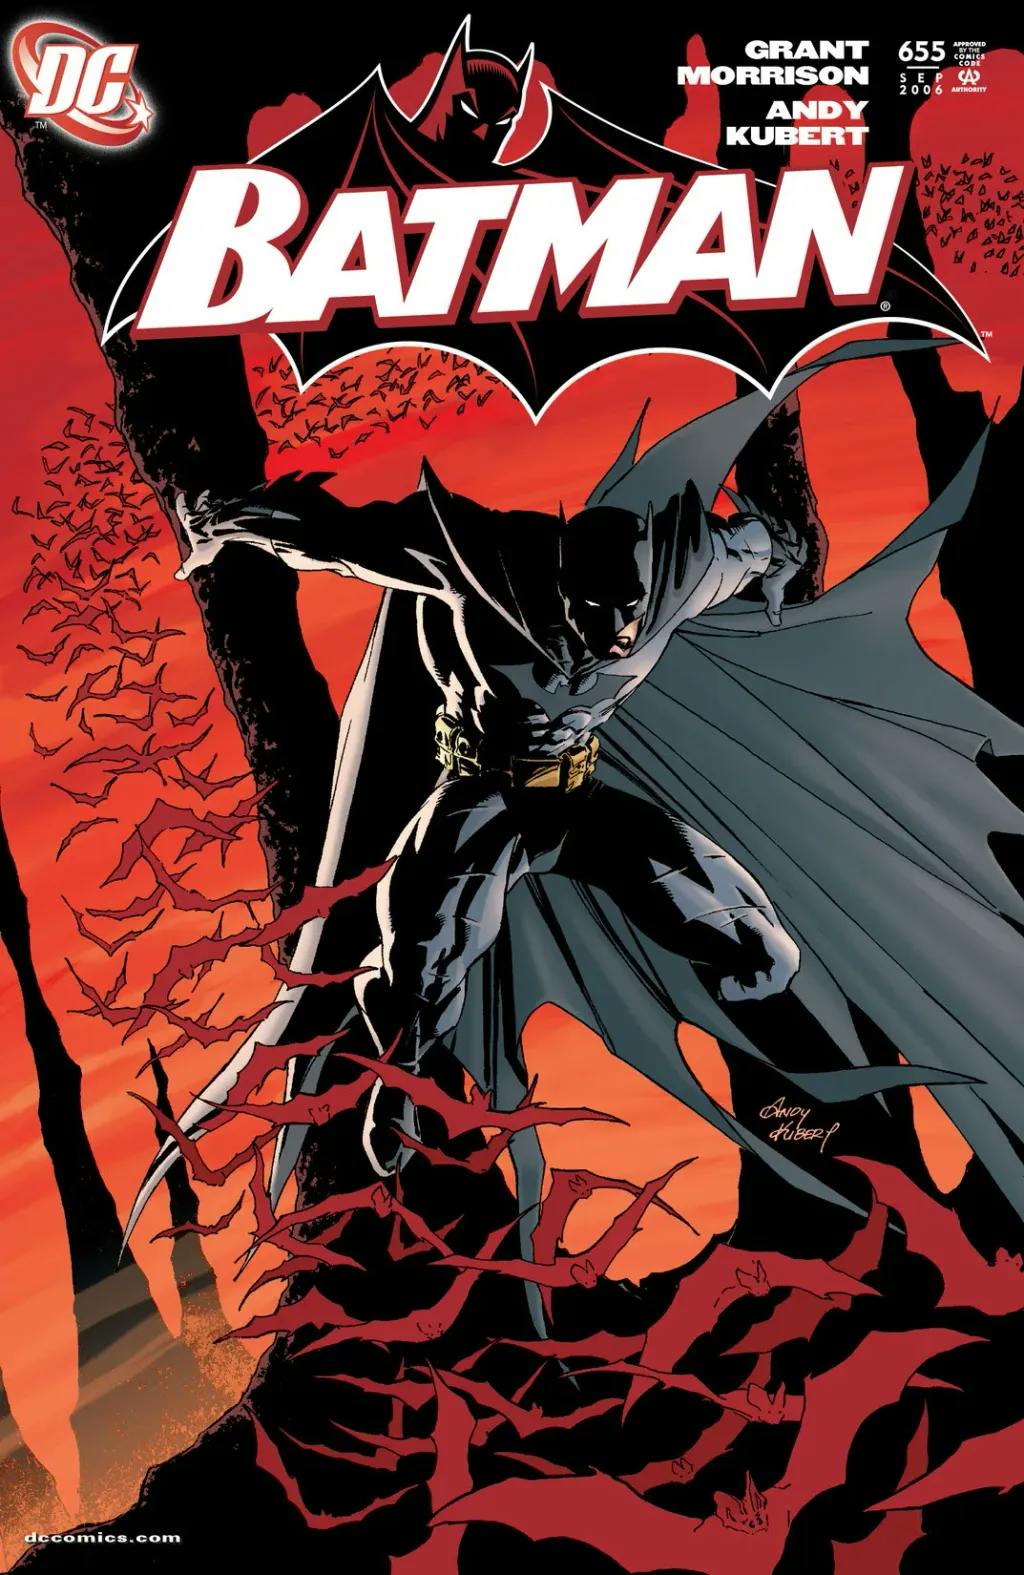 Cover of Batman #655 by Grant Morrison and Andy Kubert